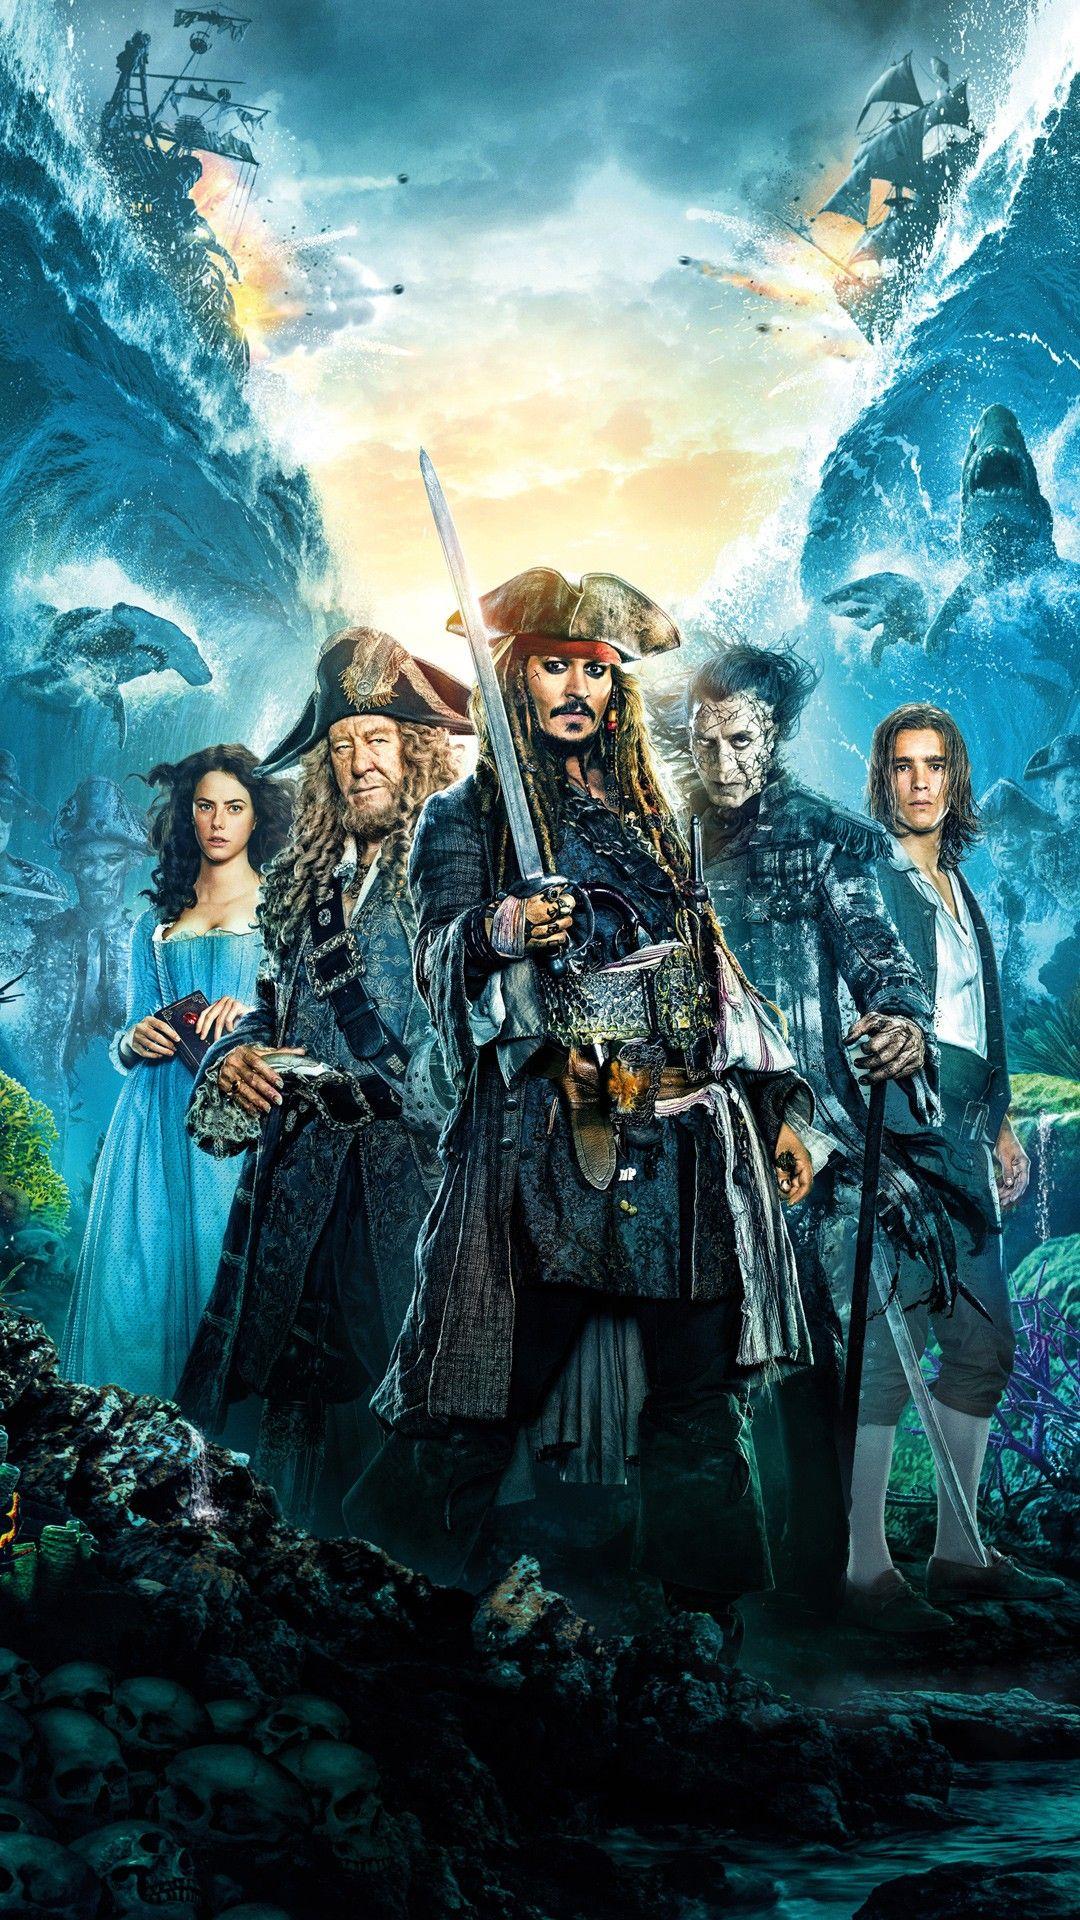 Pirates Of The Caribbean: Dead Men Tell No Tales - New Images From Trailer